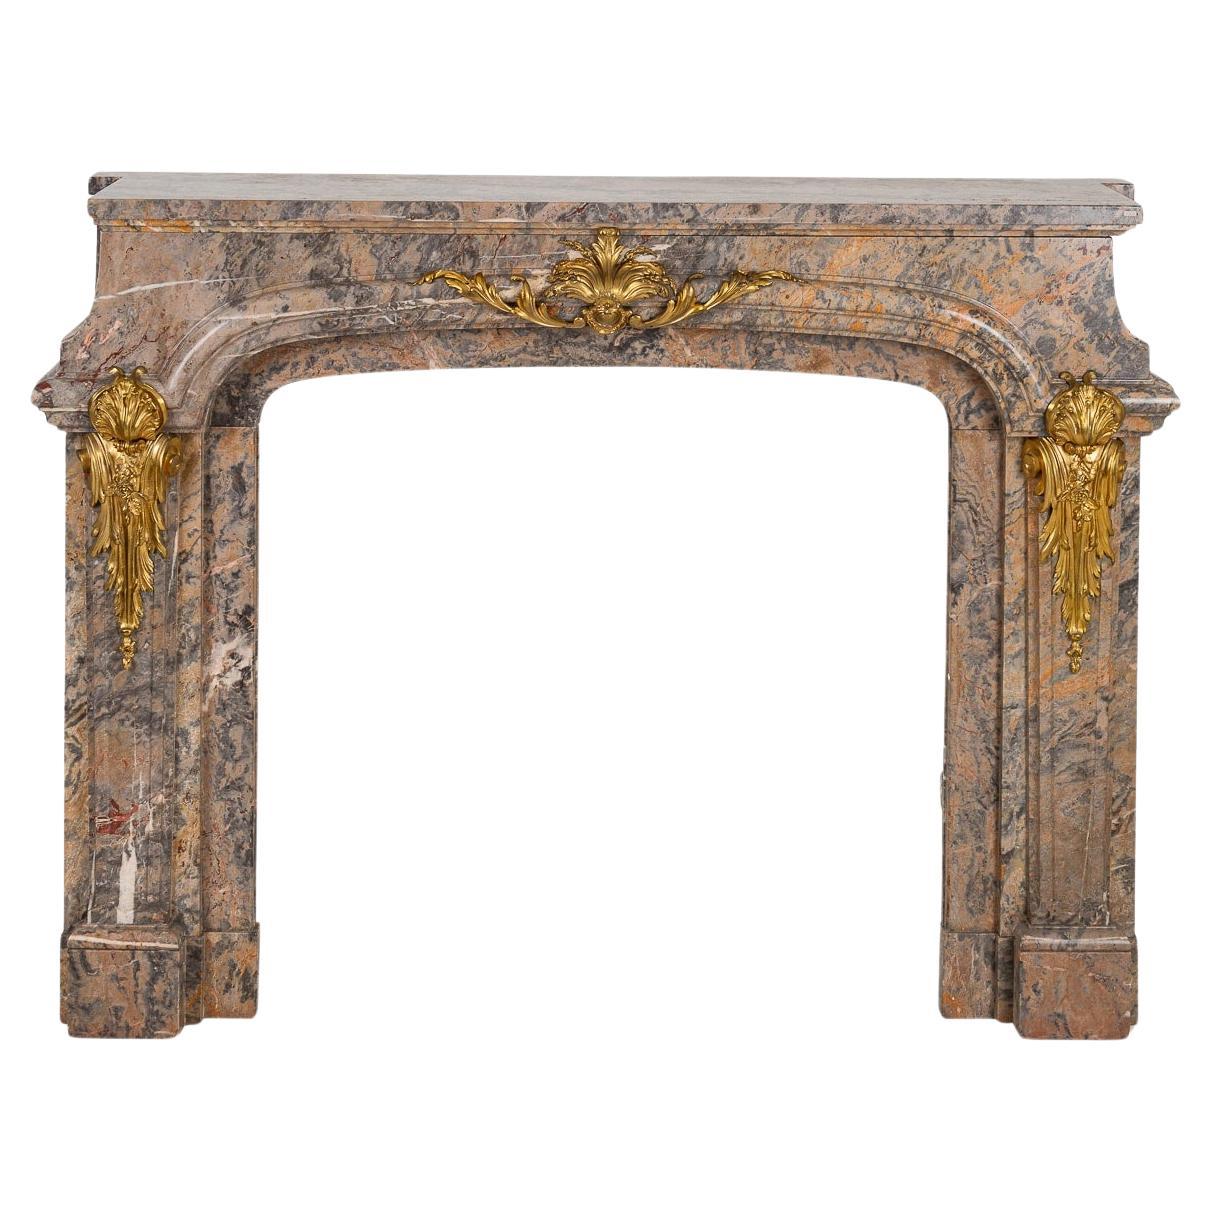 Antique 19th Century French Ormolu Mounted Caravaggio Marble Fireplace c.1880 For Sale